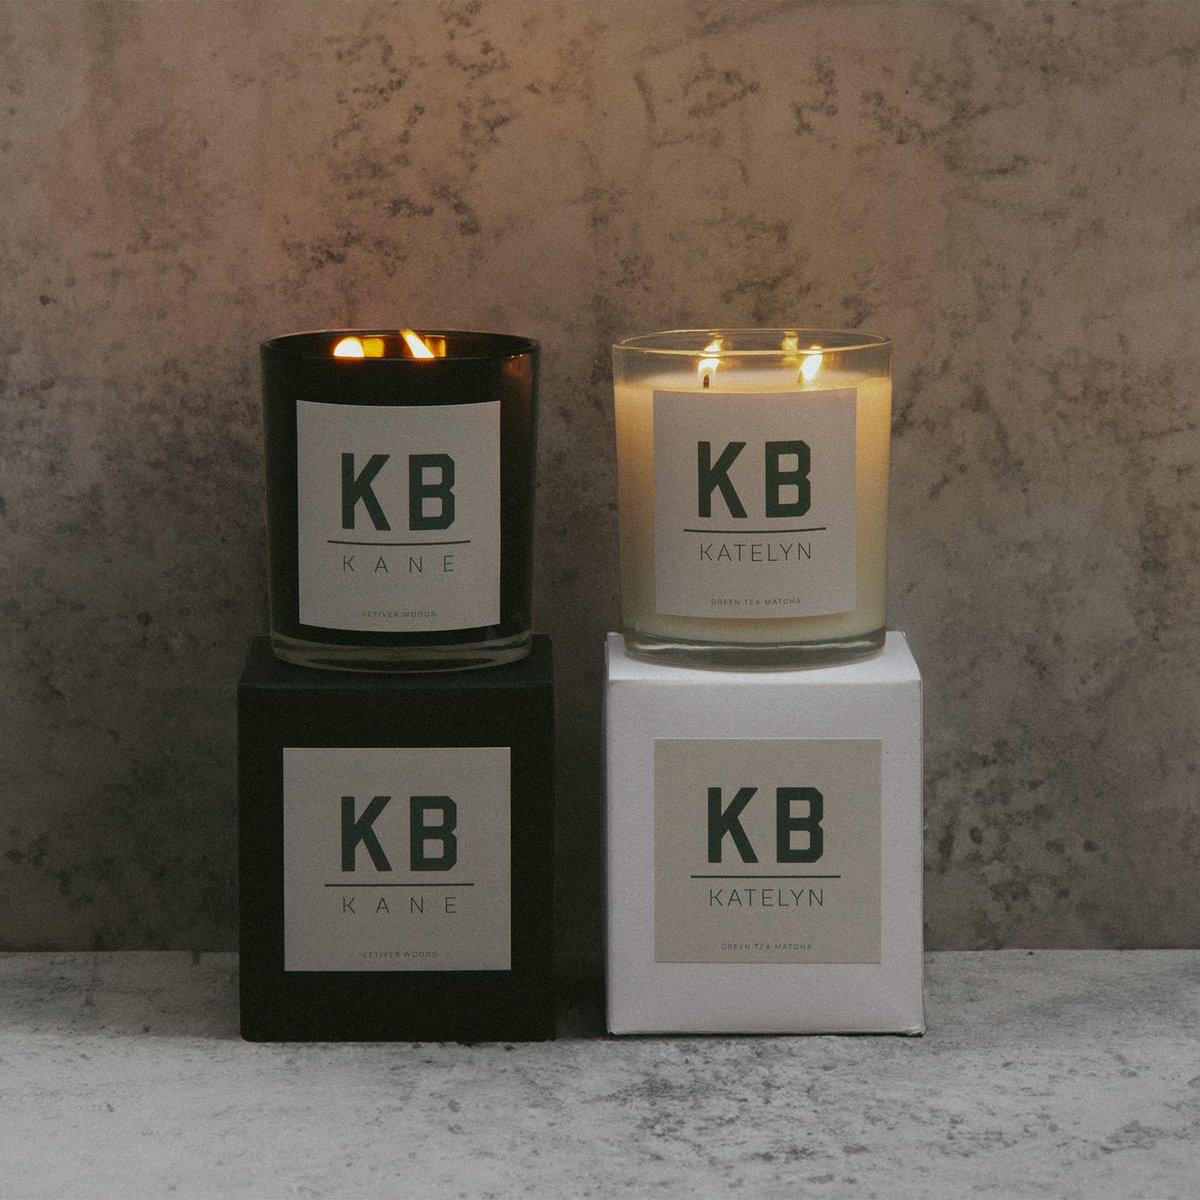 NEW KB Candles are now available kanebrown.merchmadeeasy.com/collections/ka…